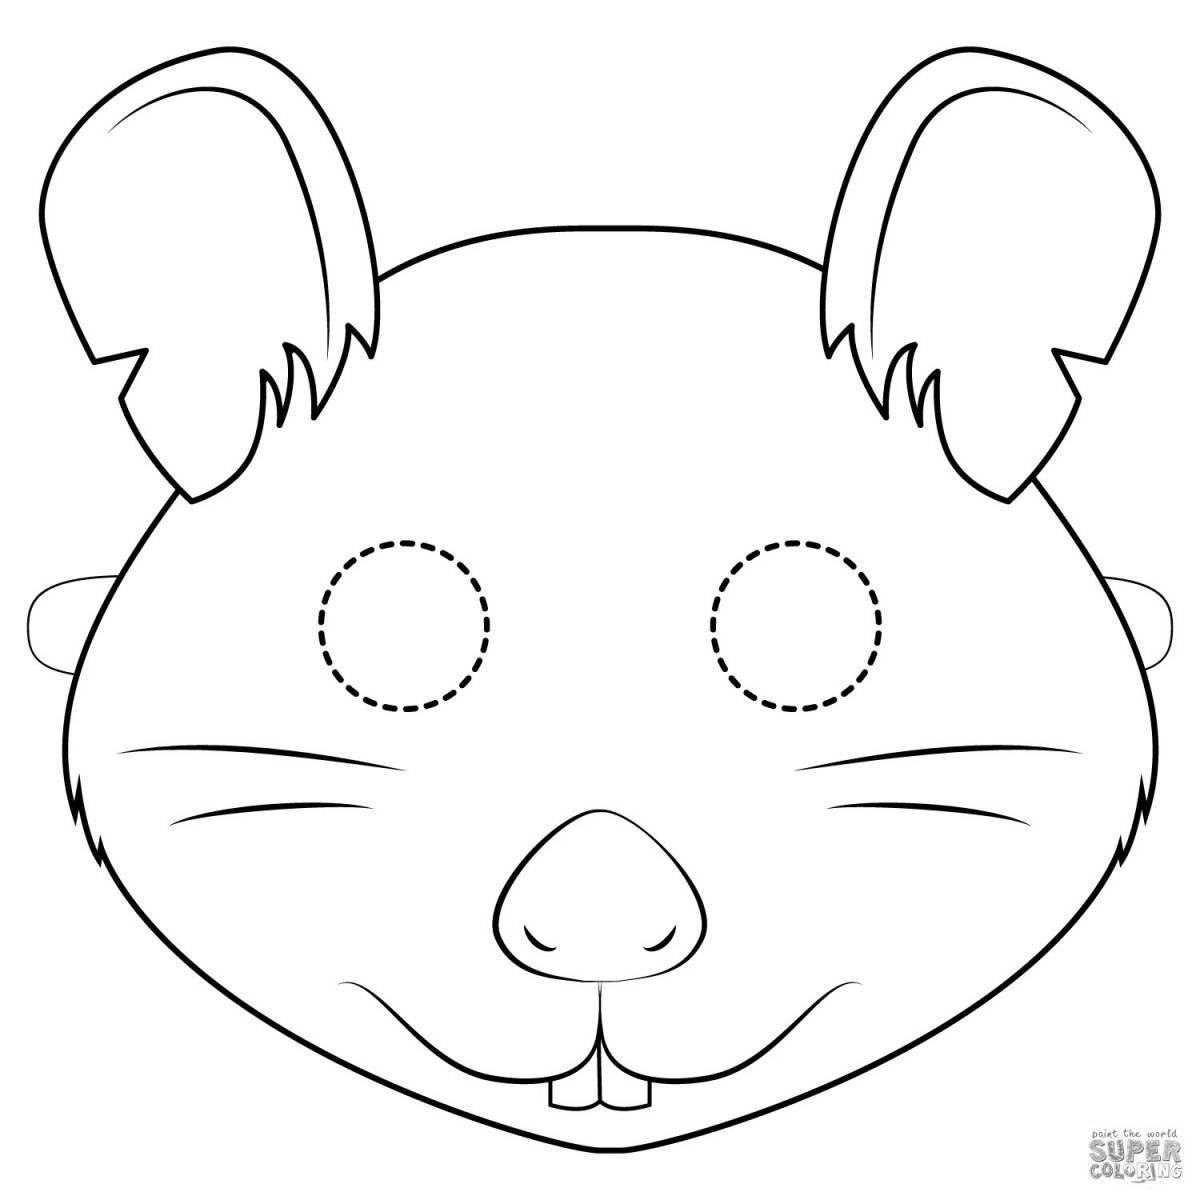 Colourful mouse head coloring page